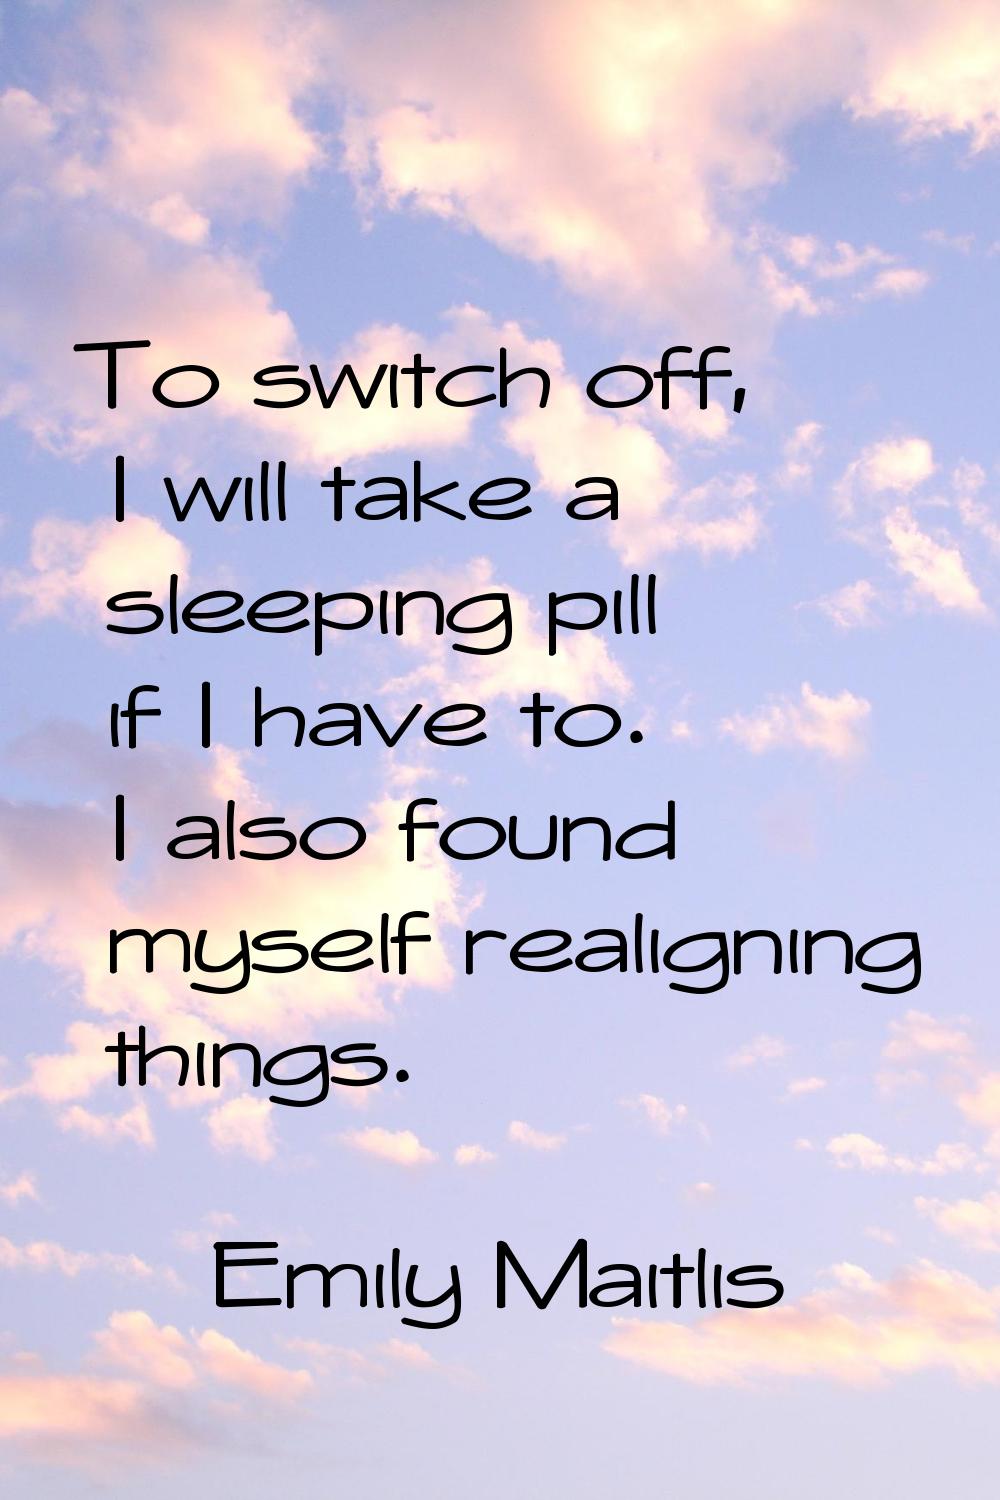 To switch off, I will take a sleeping pill if I have to. I also found myself realigning things.